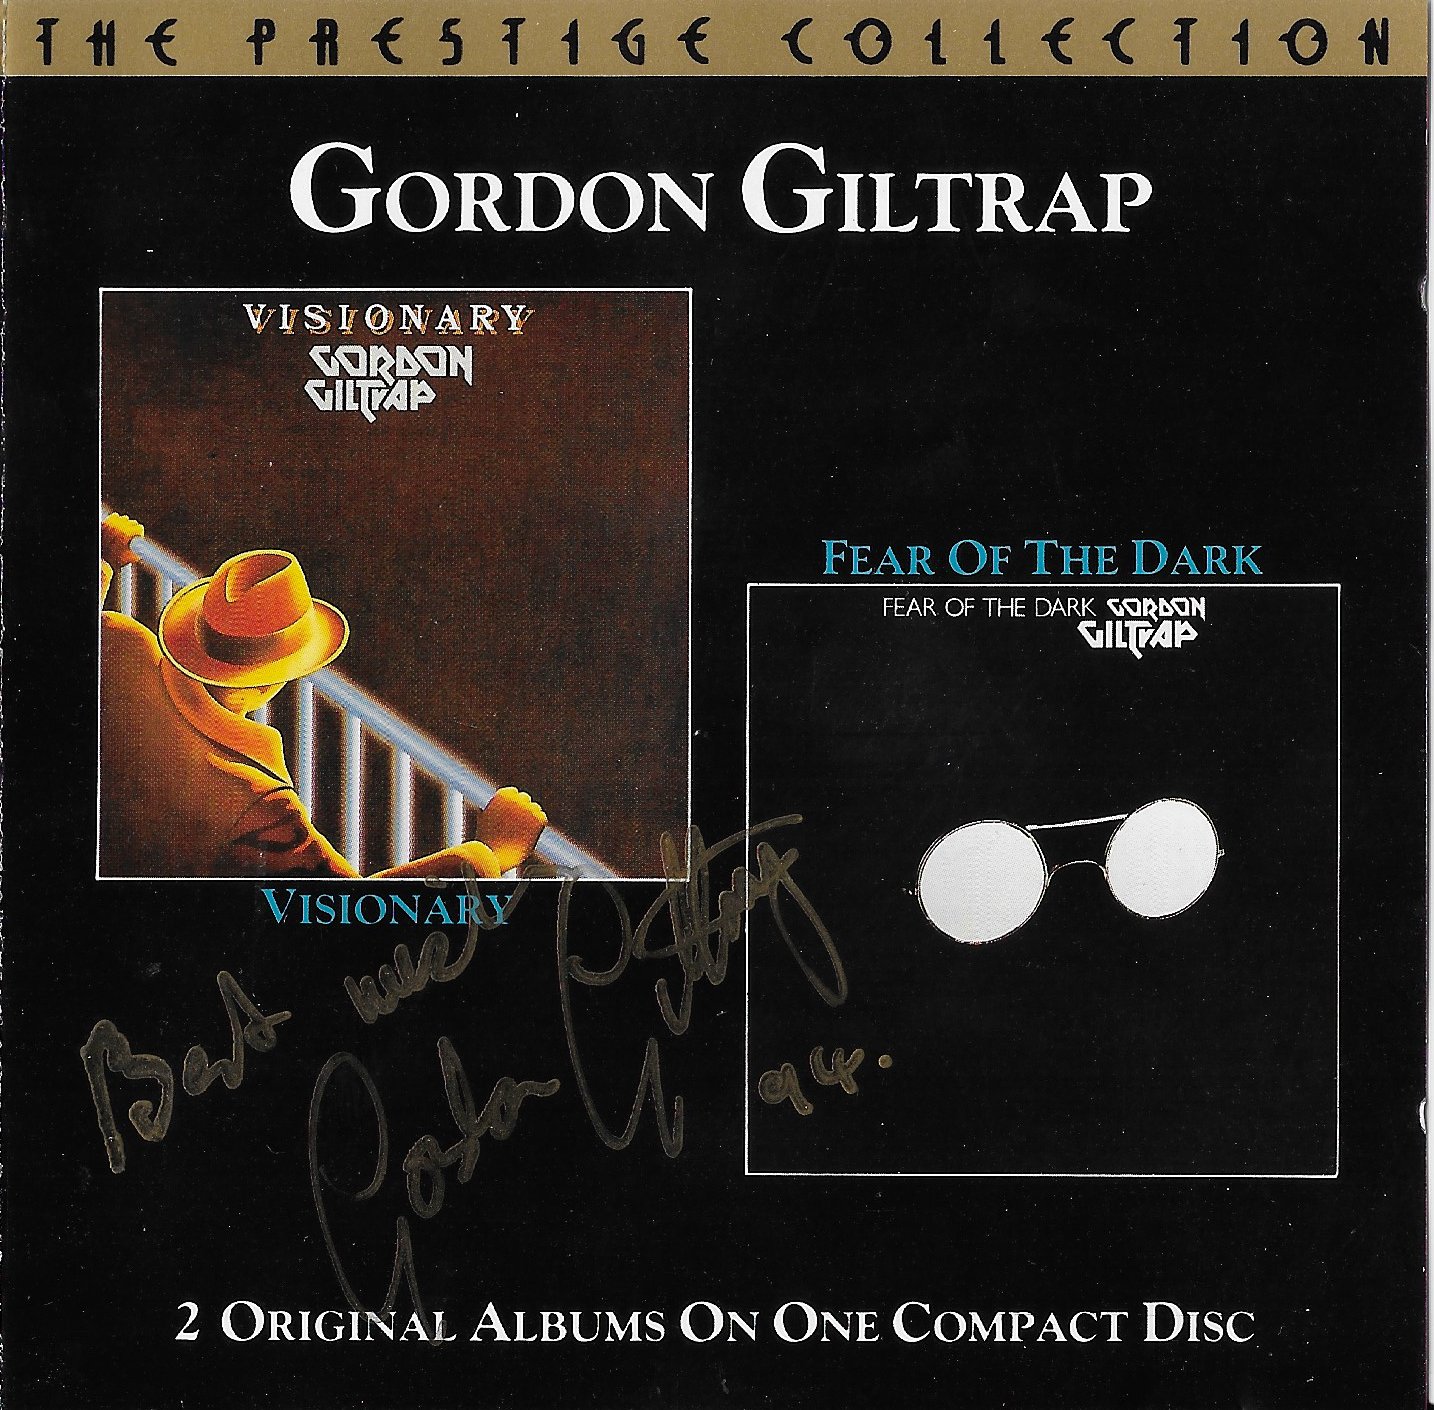 Picture of CDPM 851 Visionary / Fear Of The Dark by artist Gordon Giltrap from the BBC cds - Records and Tapes library